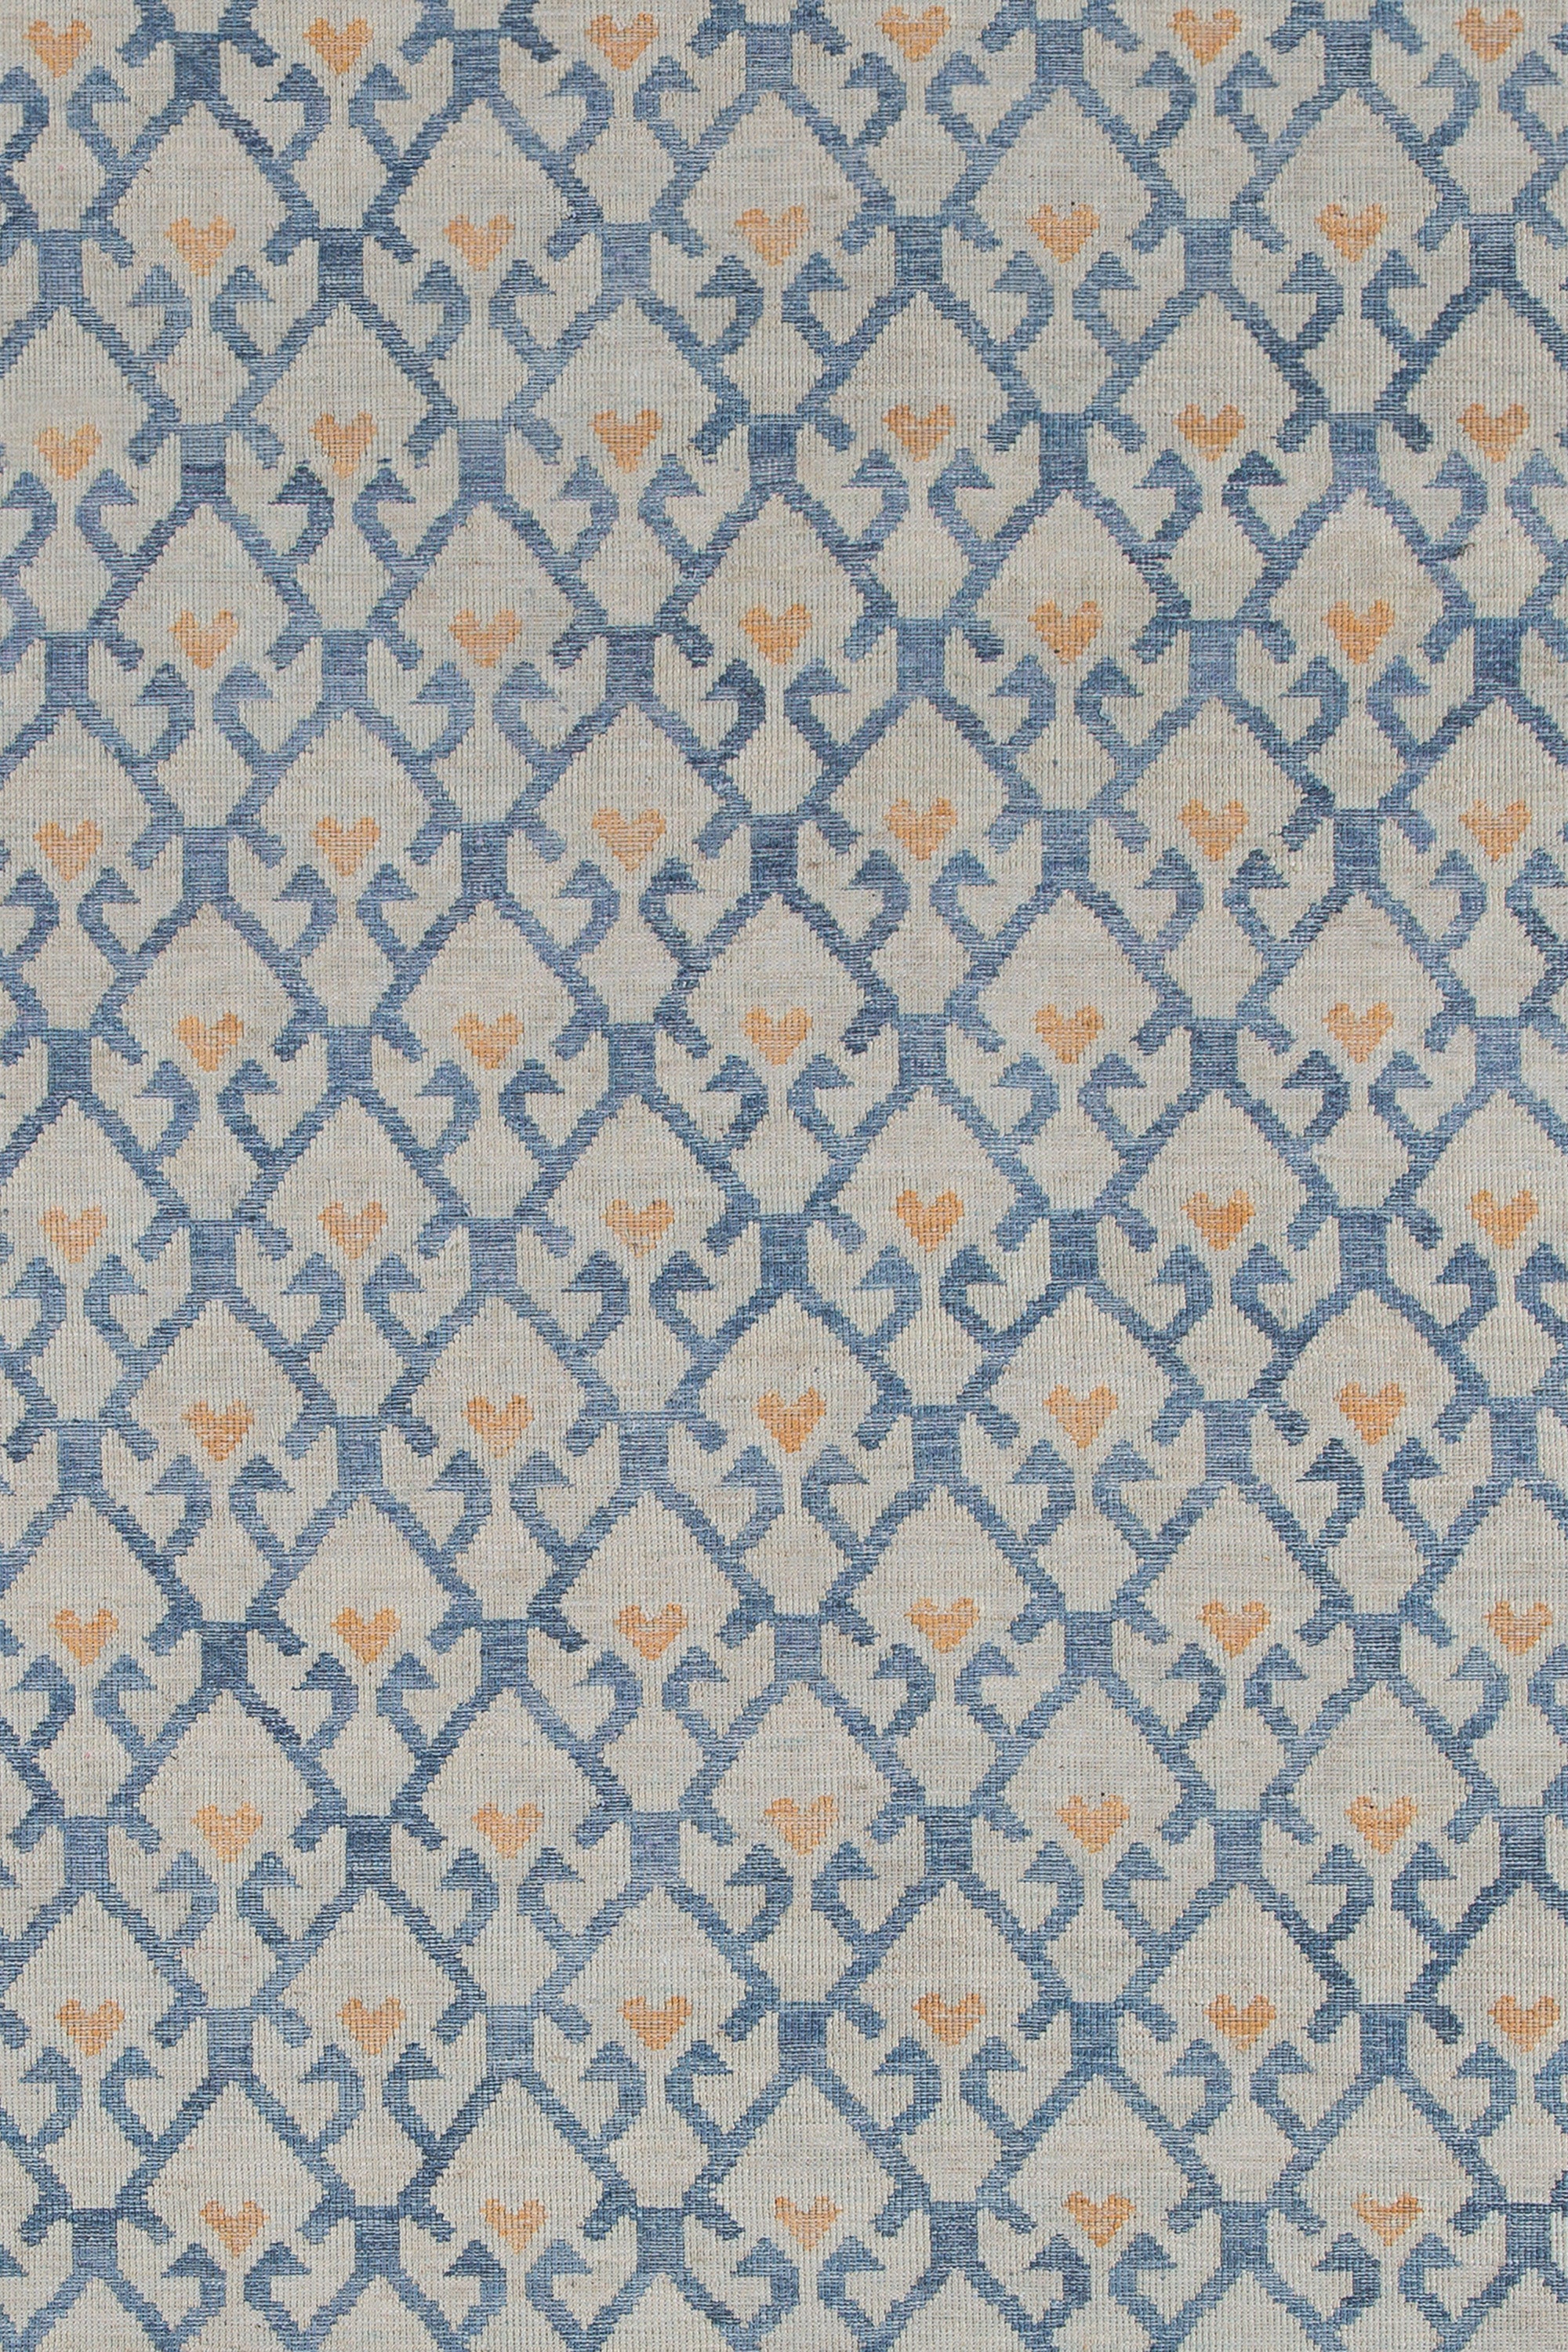 Detail of the Avesta Rug in Blue, a blue lattice pattern on a beige field with small orange heart accents. 